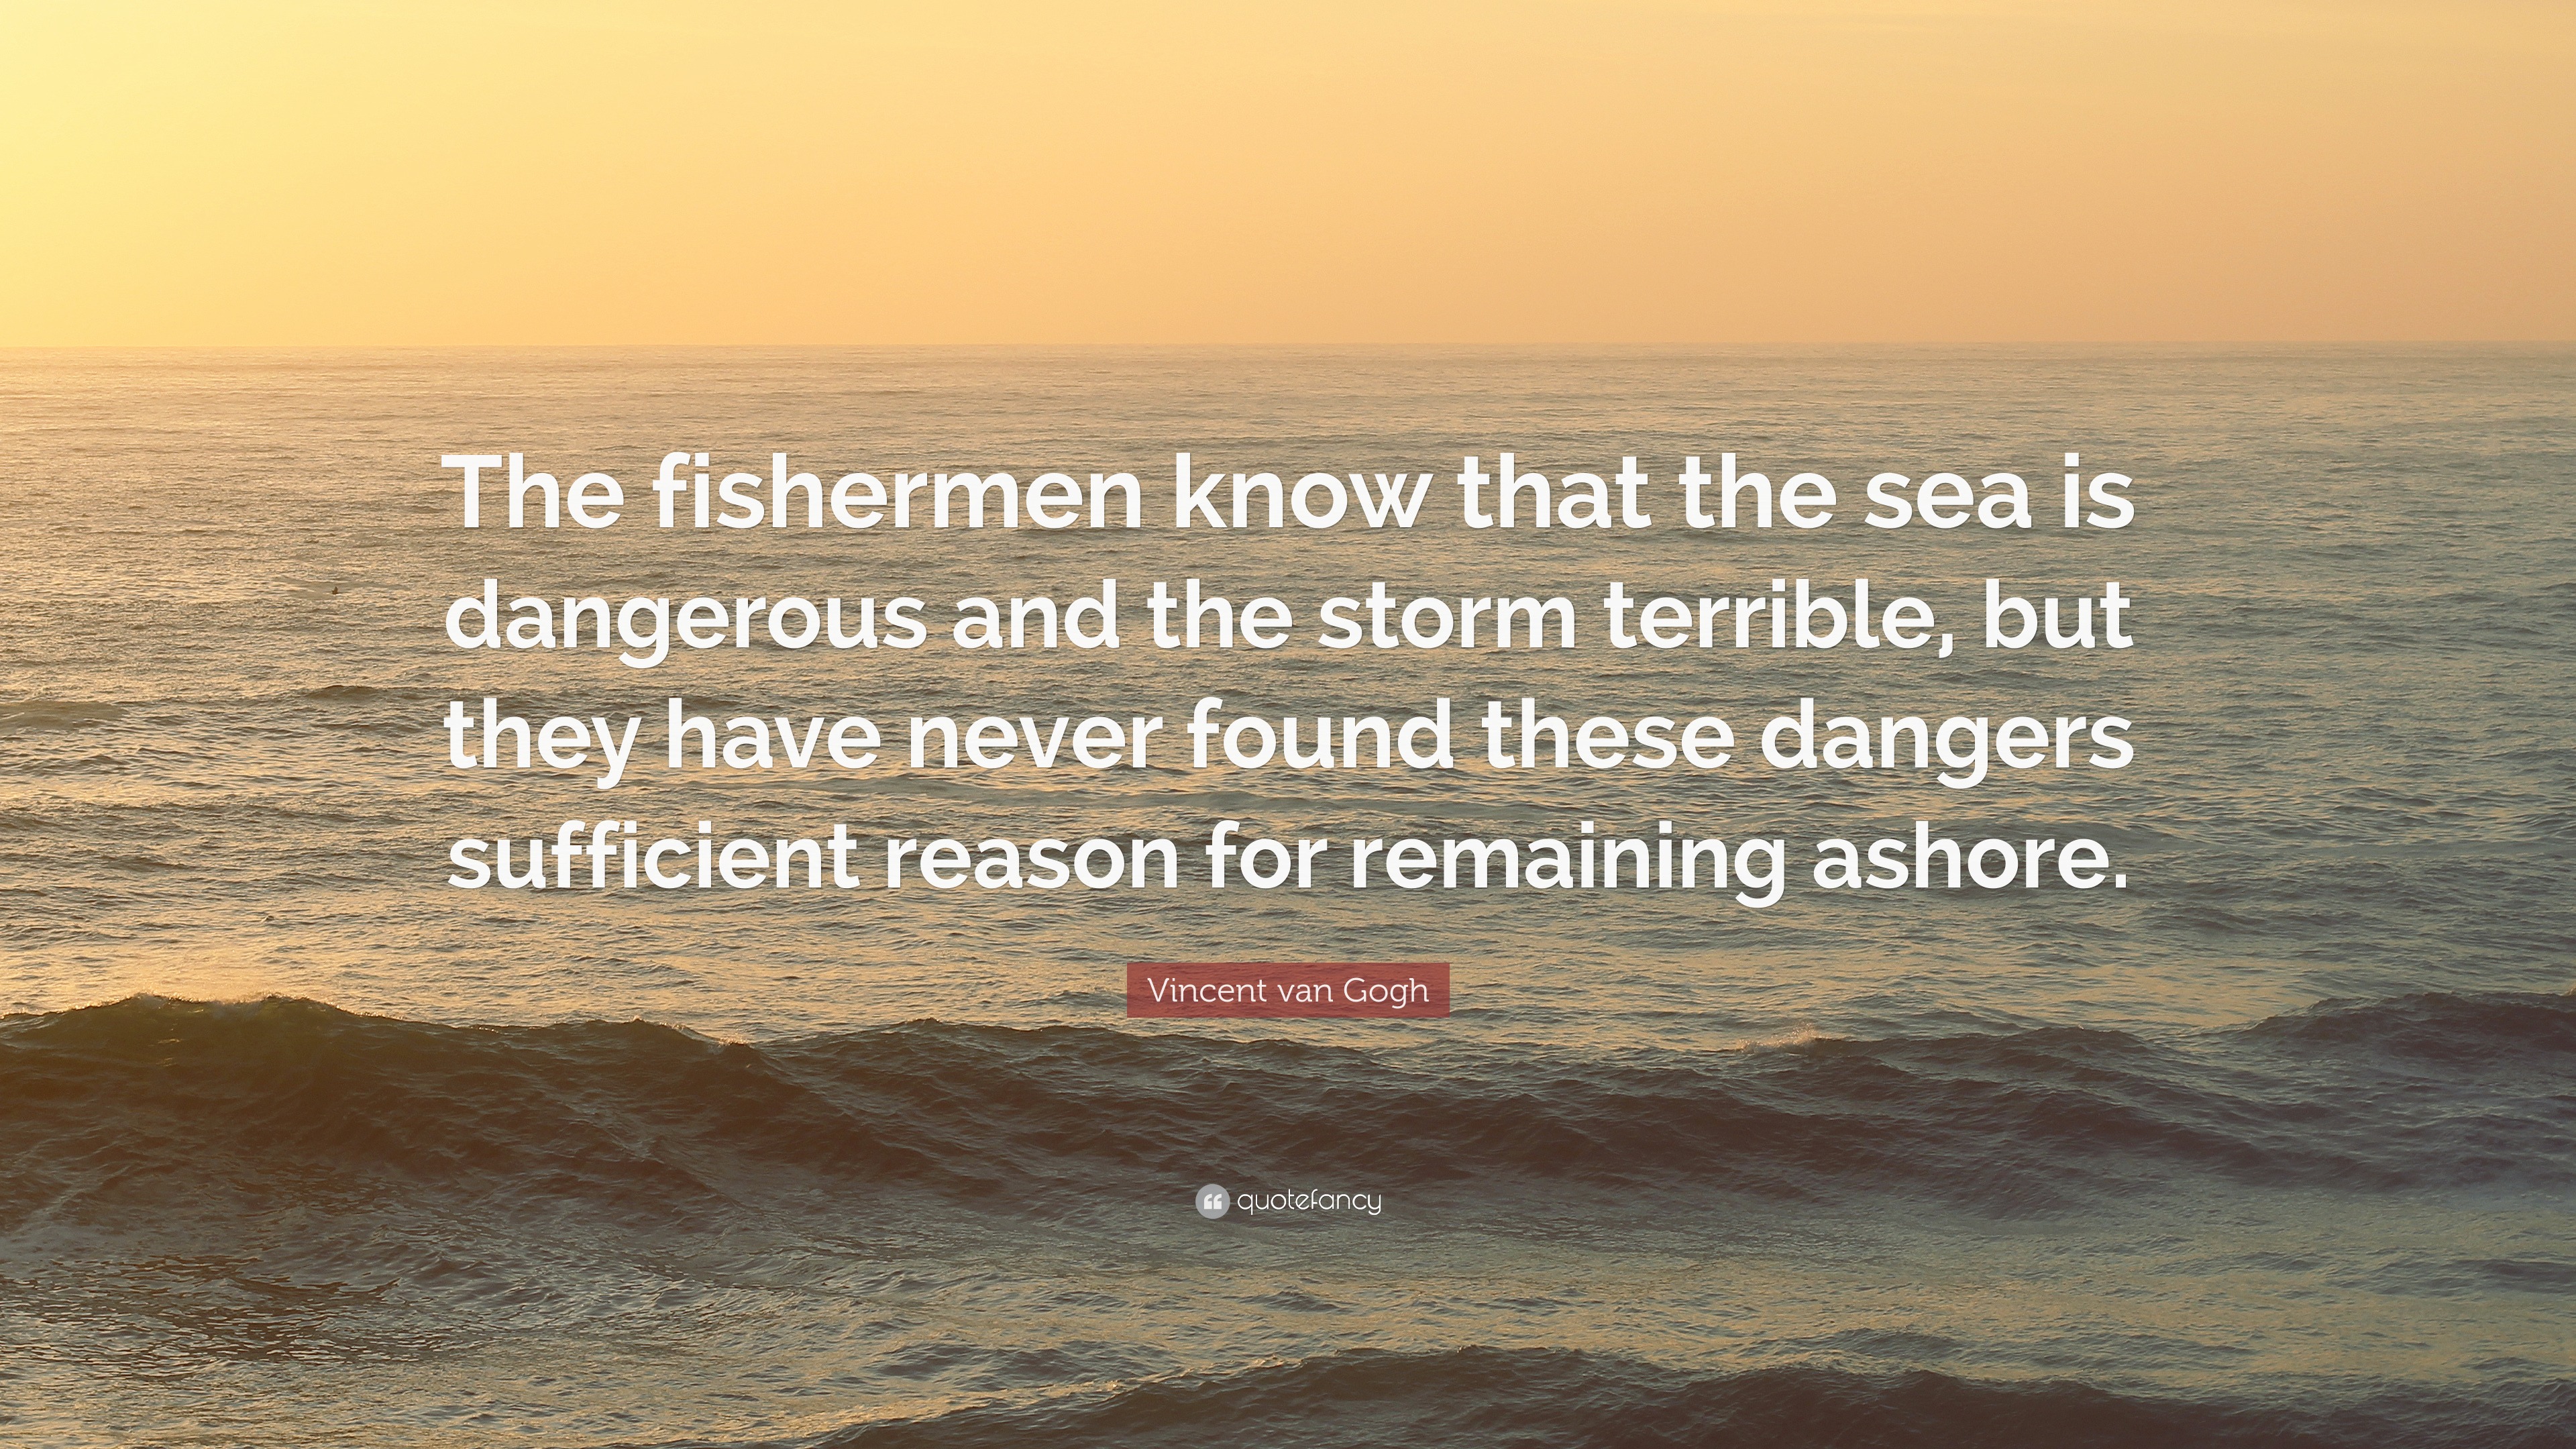 4683976 Vincent van Gogh Quote The fishermen know that the sea is